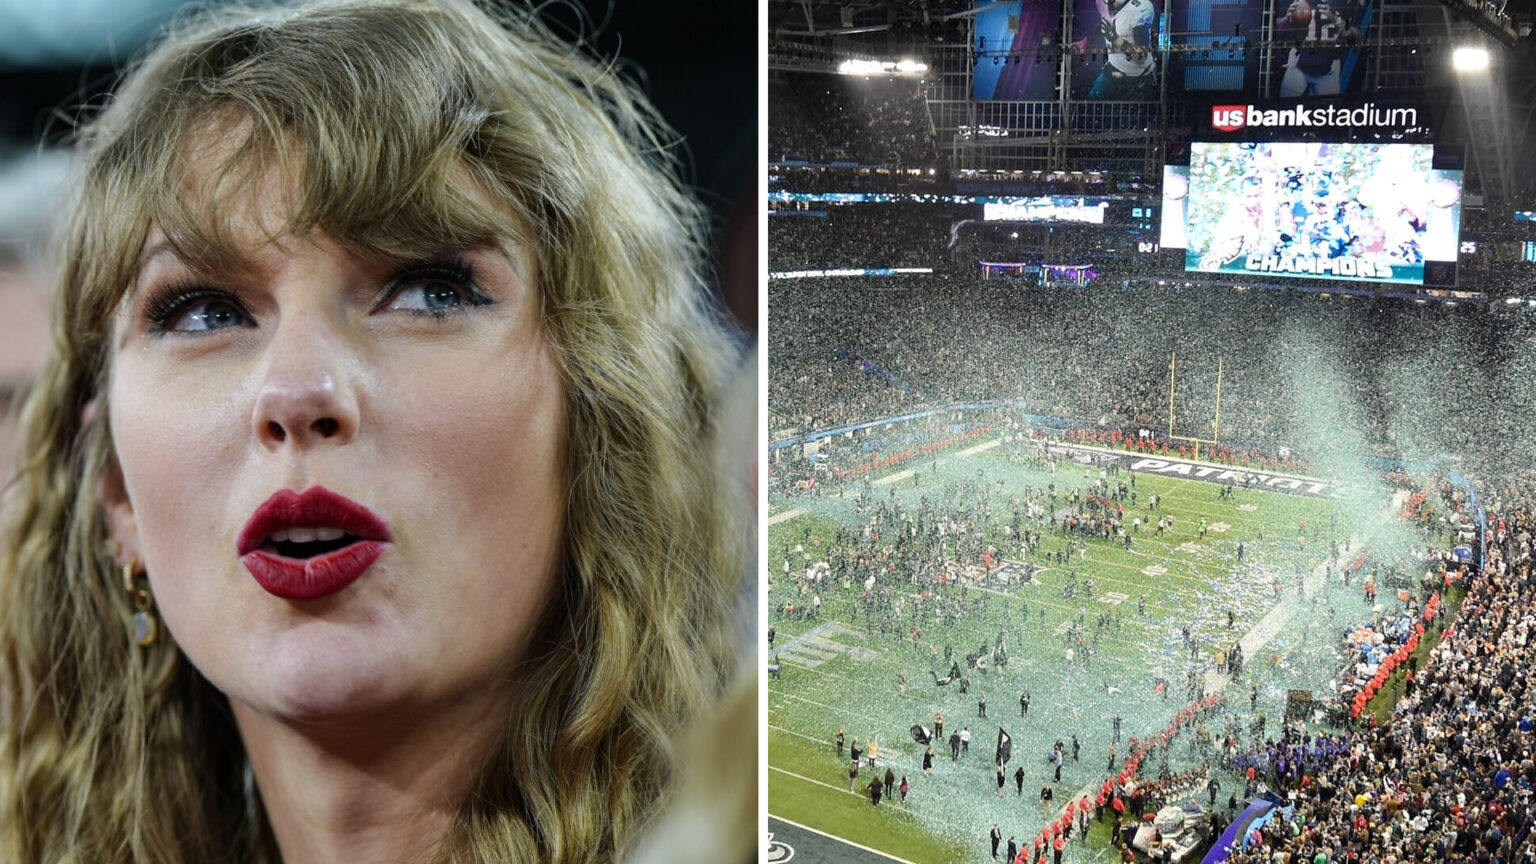 Breaking: NFL Reportedly Considering Banning Taylor Swift from Super Bowl, “We’re Tired of Her”